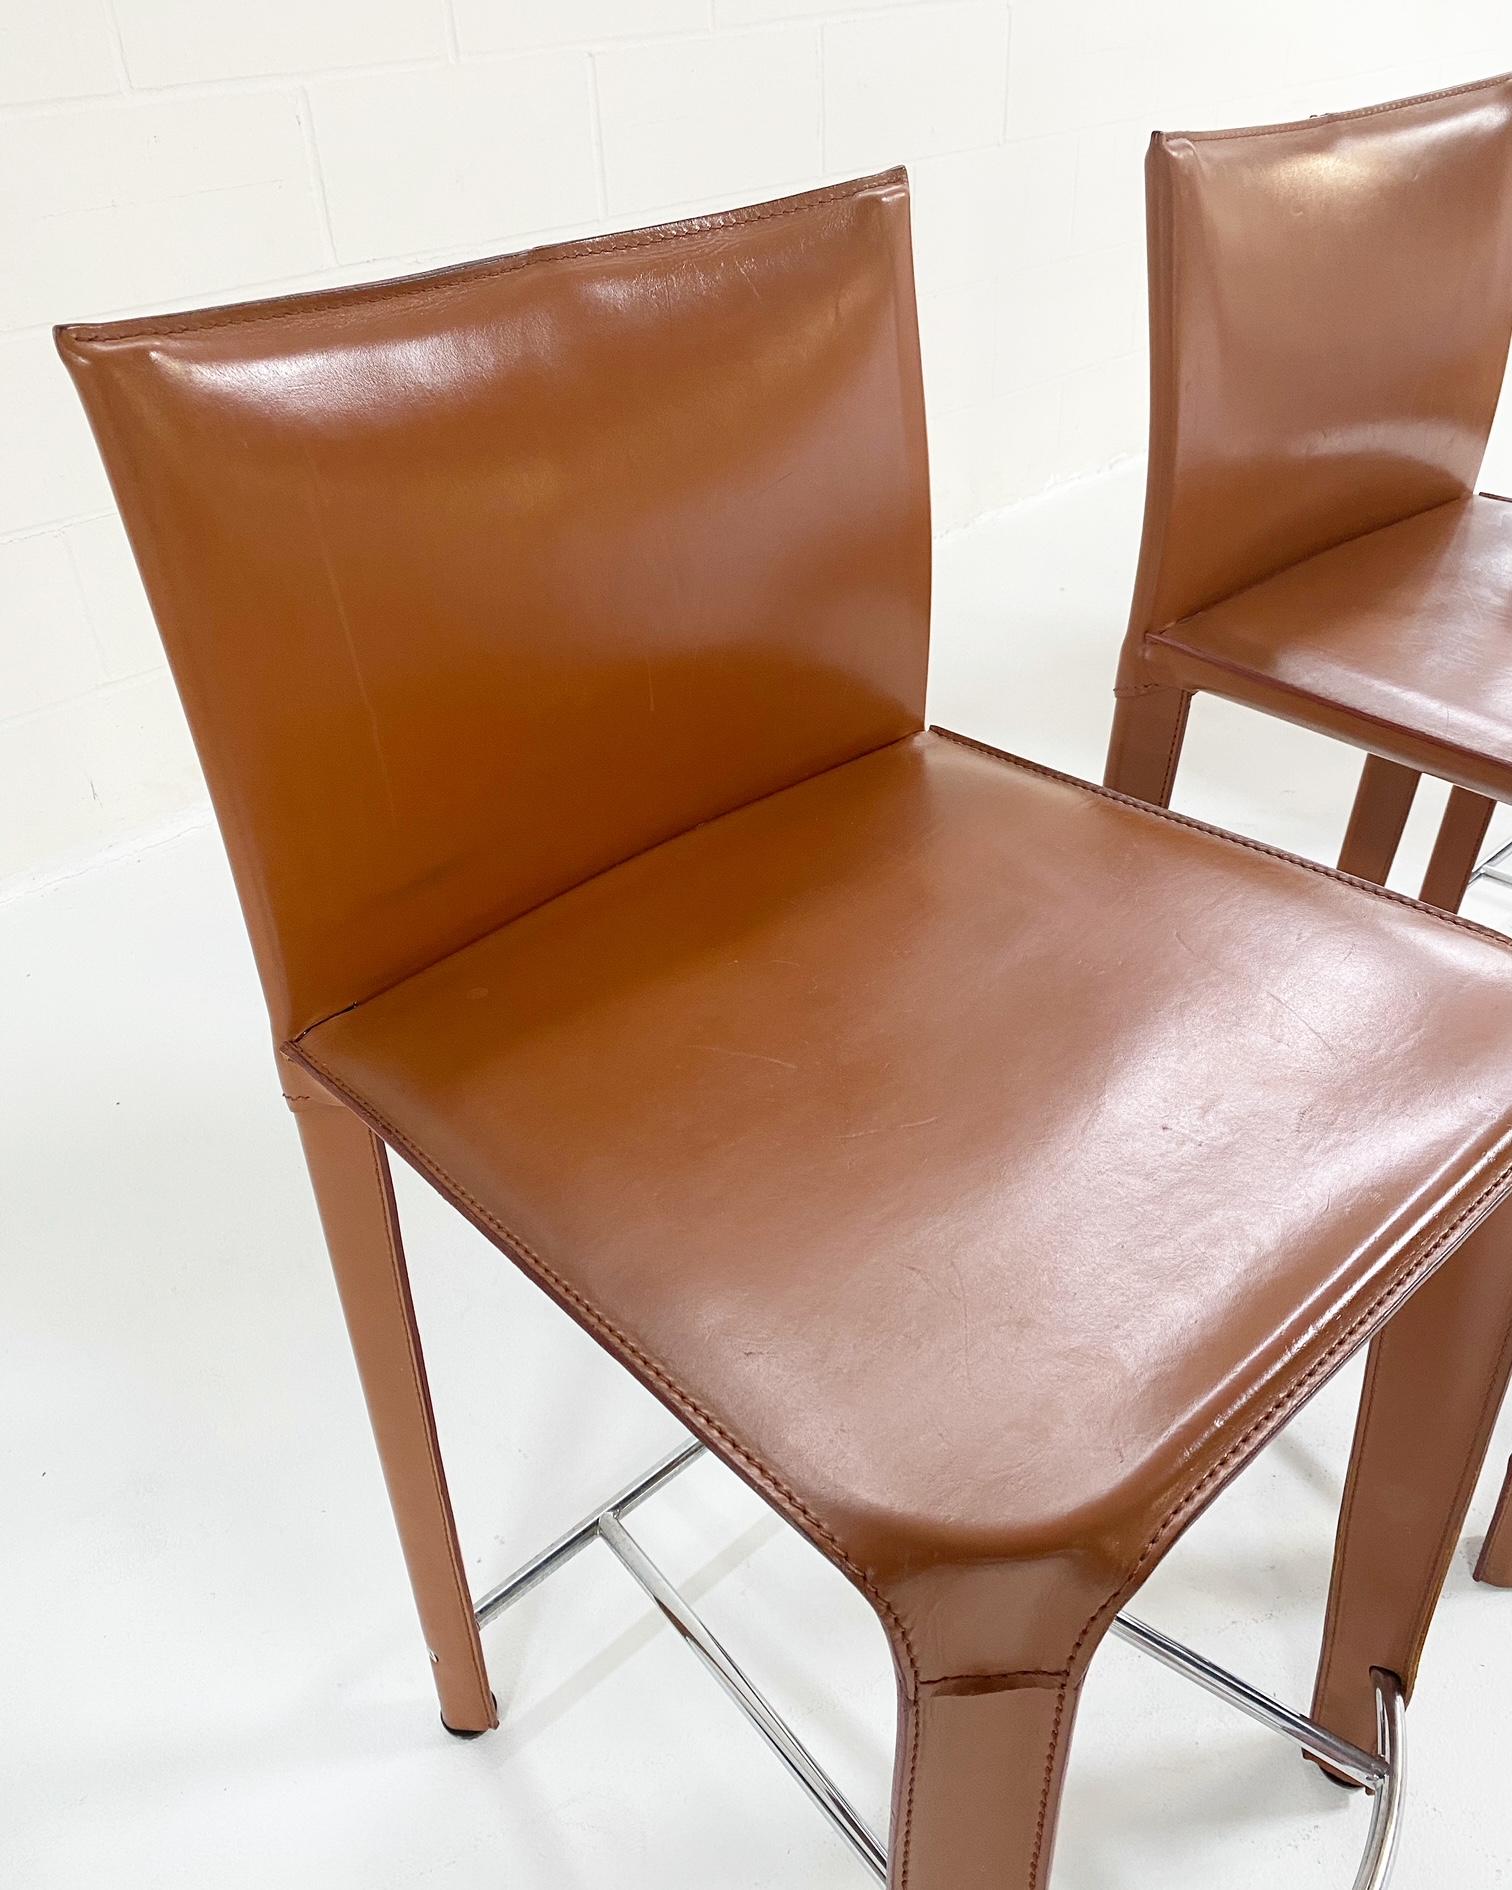 A Classic stool designed by Parisian-based manufacturer, Roche Bobois. The leather is such a great caramel color. We love the way it wraps around the piece. And a nice finish with the chrome foot plate. These are very comfortable and in great